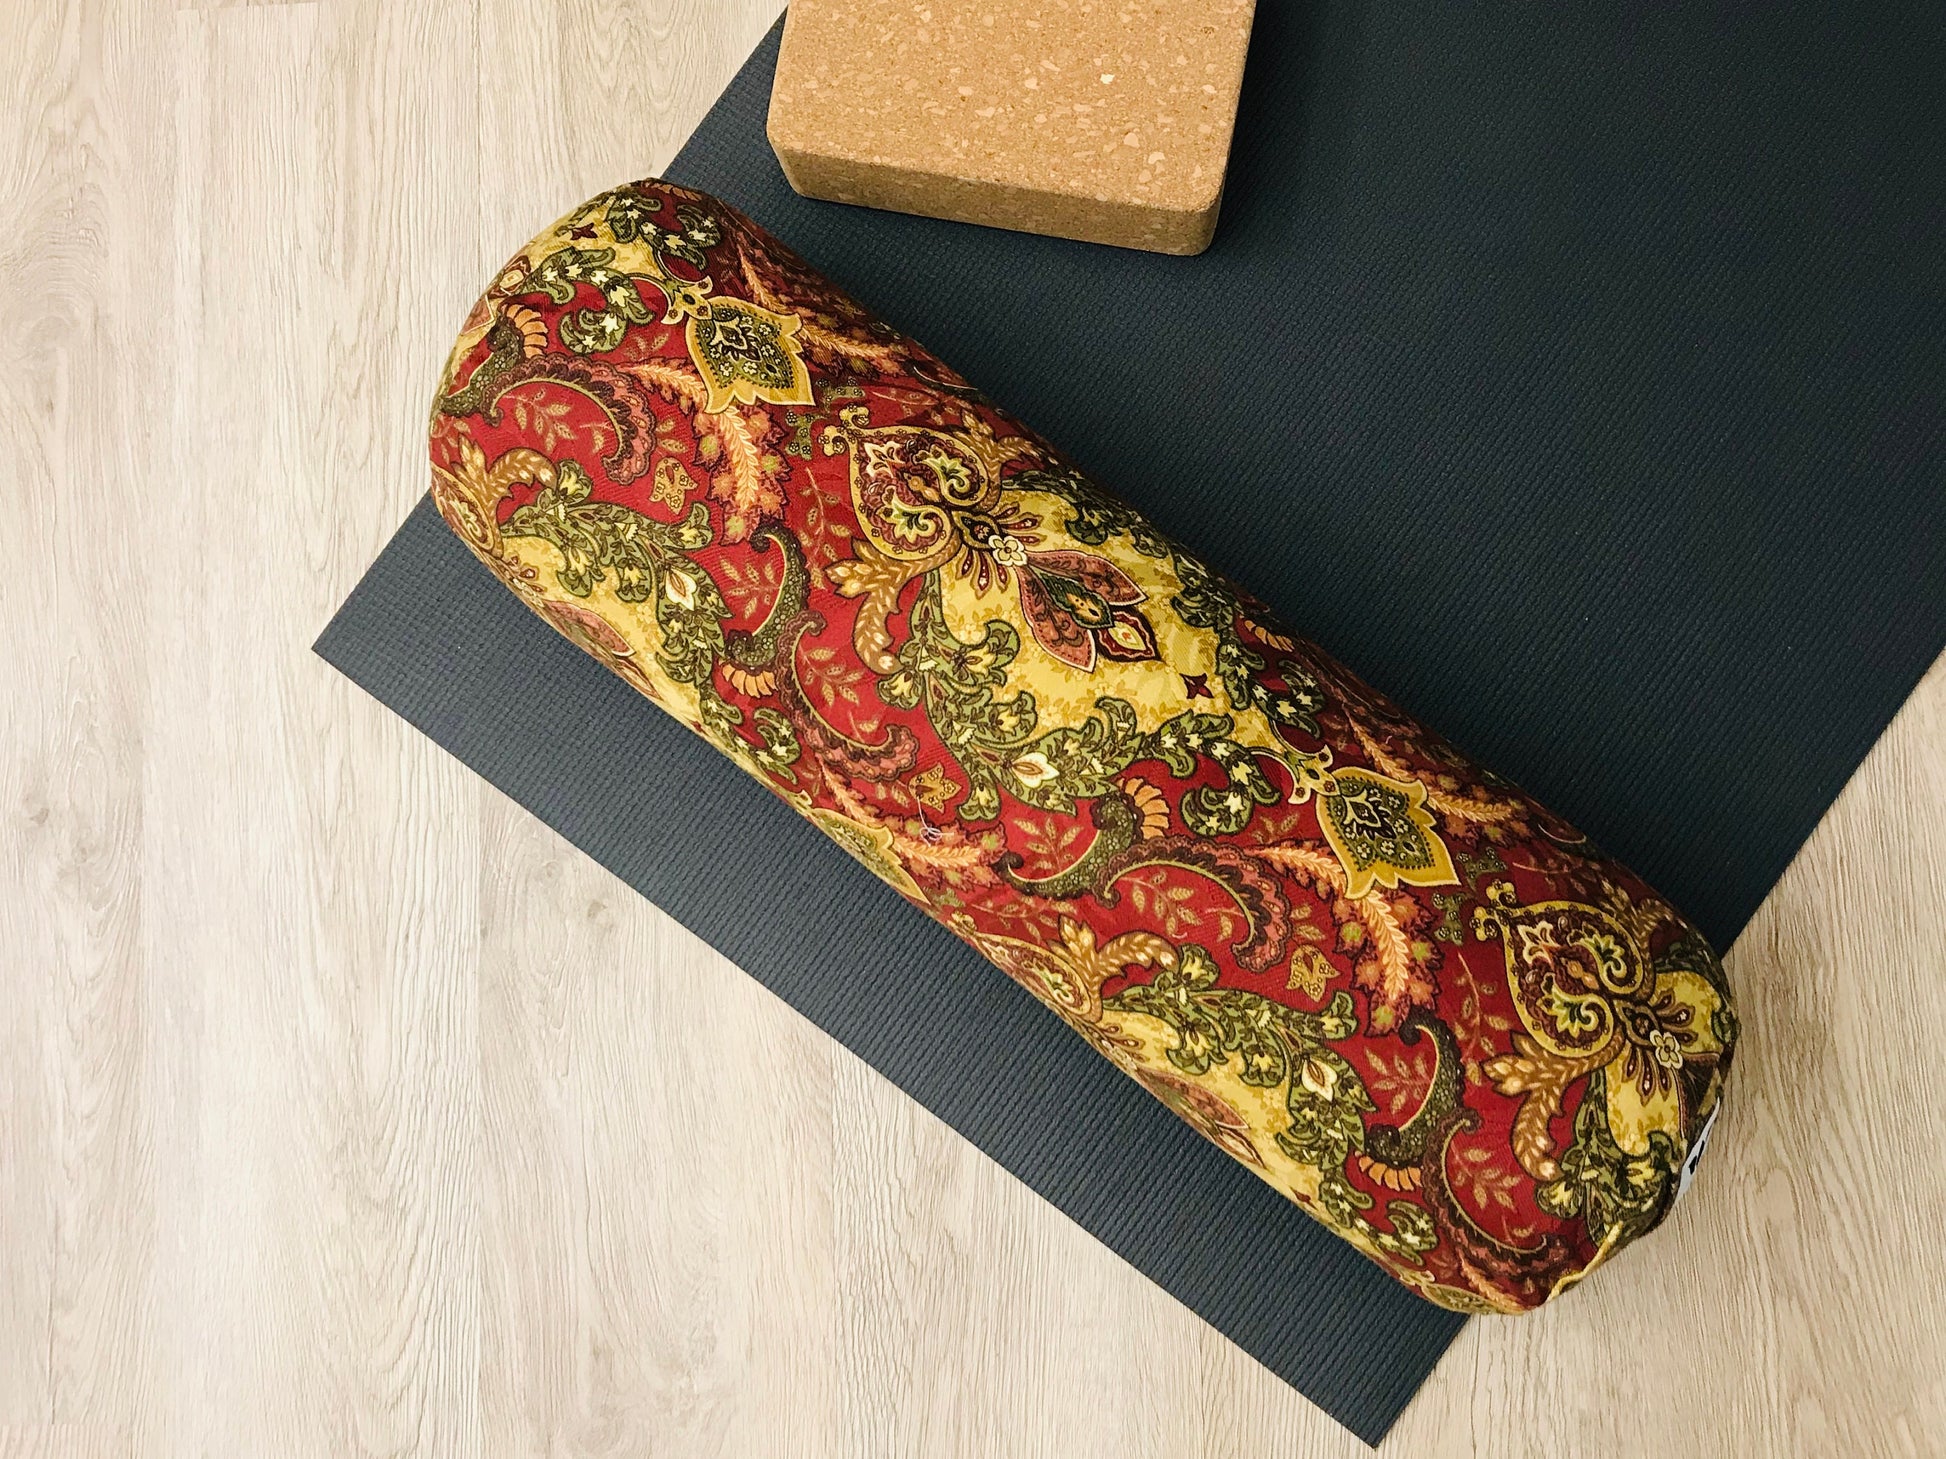 Matching product. eight by twenty four inch round yoga bolster. Handcrafted by My Yoga Room Elements